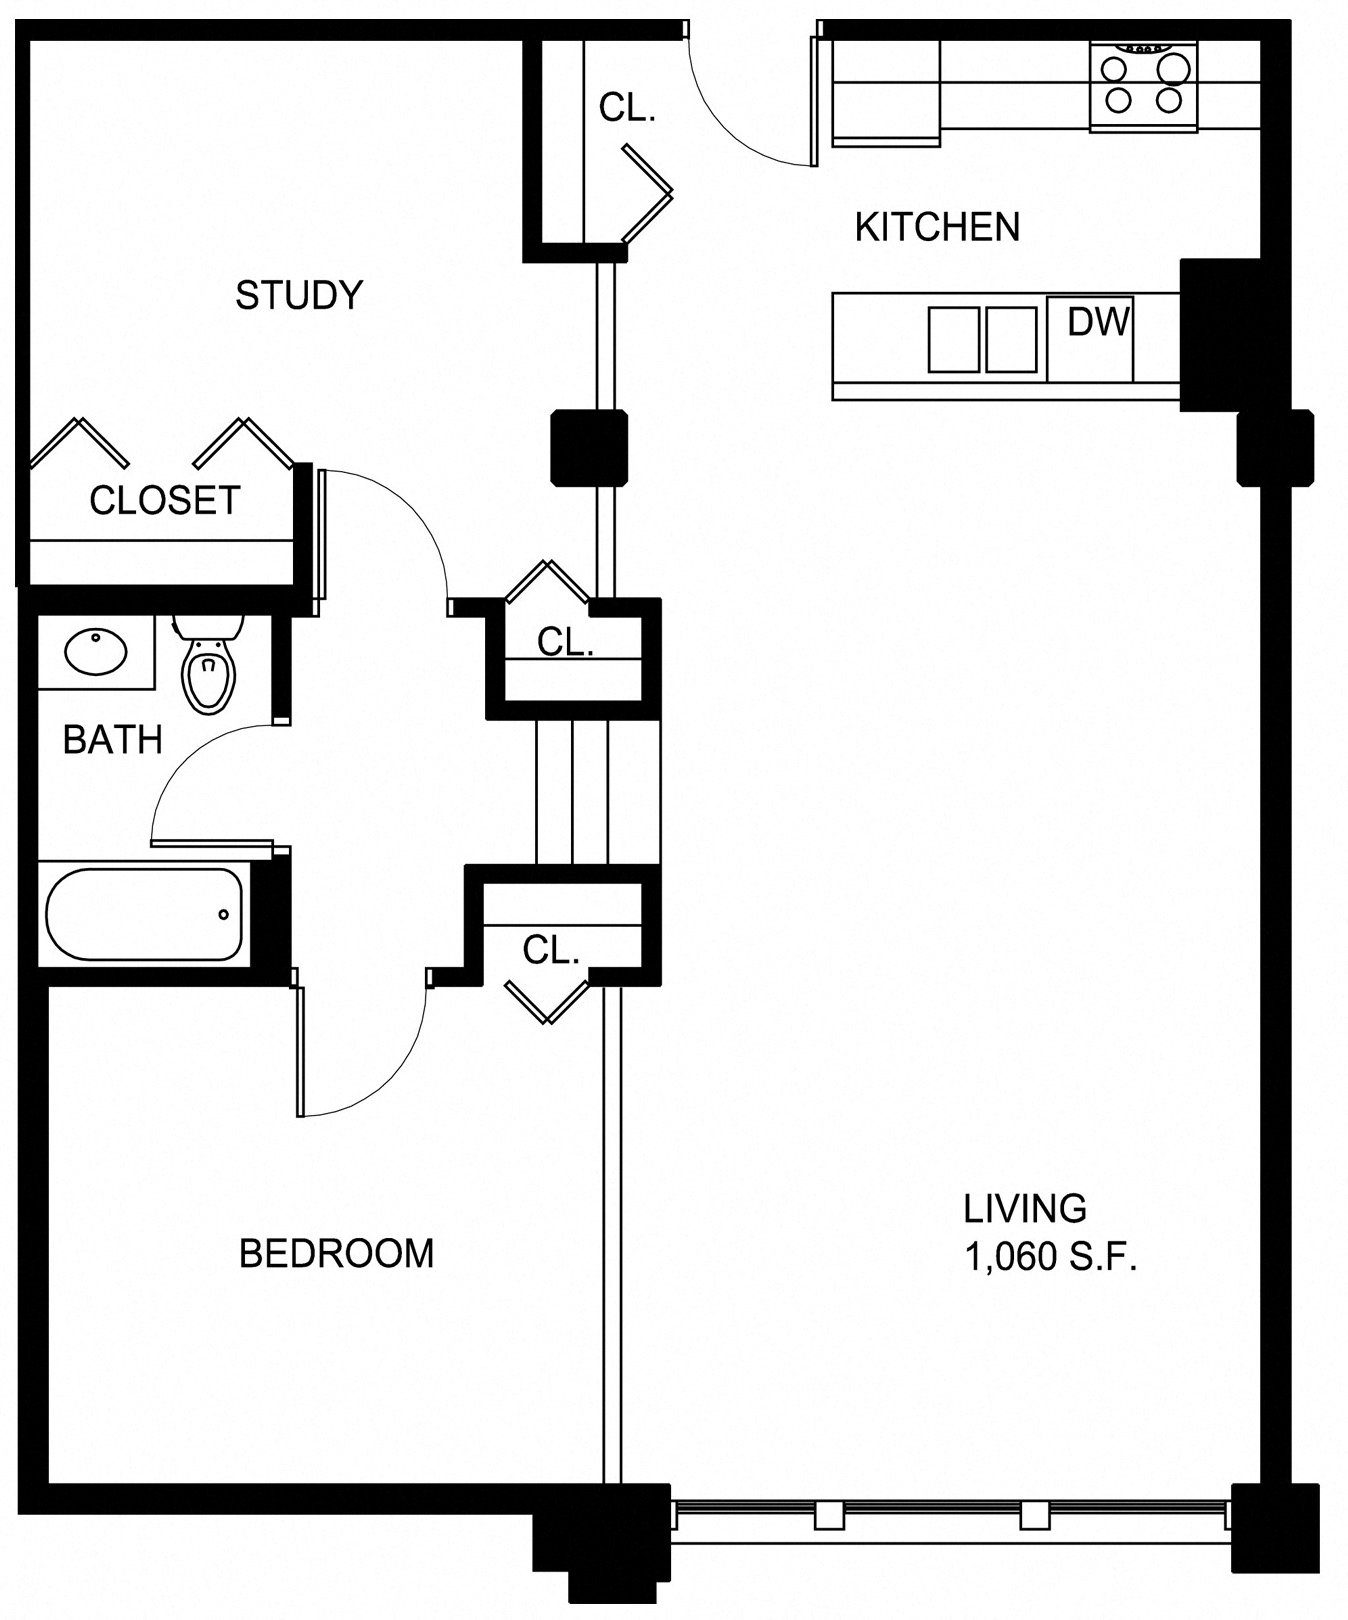 Floorplan for Apartment #P626, 1 bedroom unit at Halstead Providence